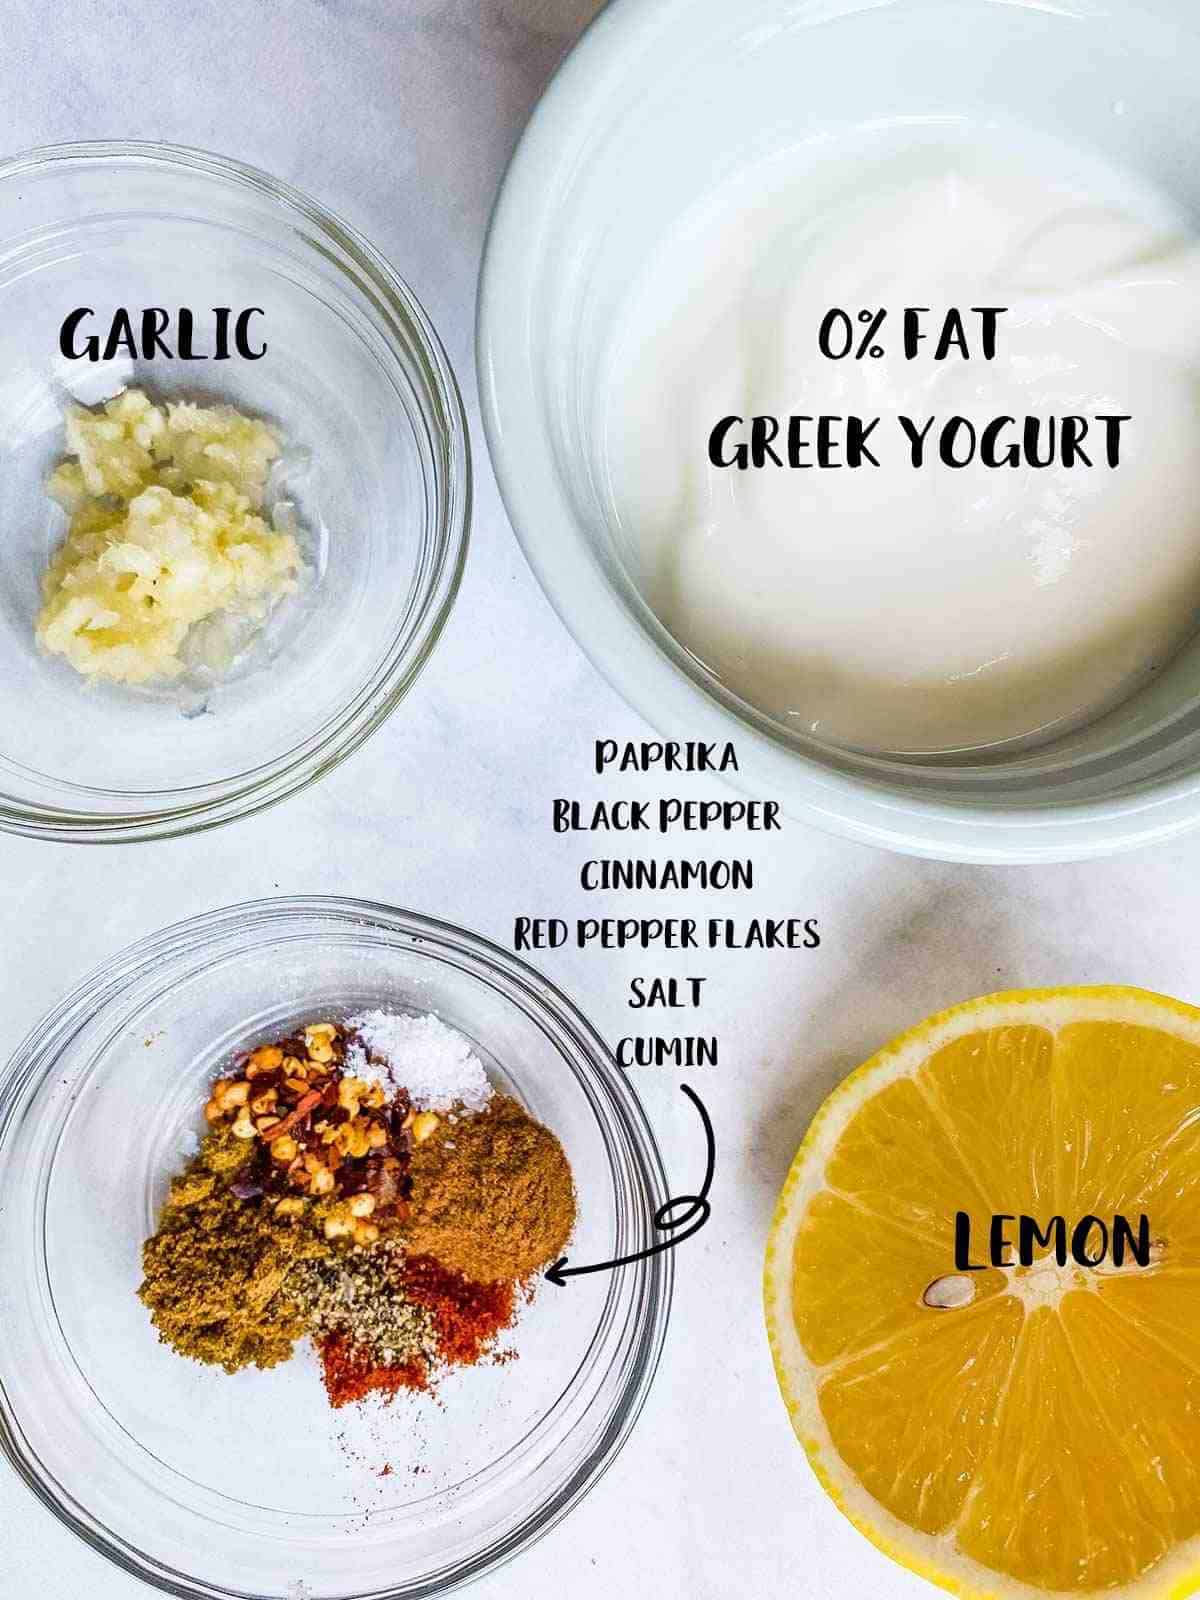 Small bowls of garlic, yogurt, and middle eastern spices and a lemon on a white table